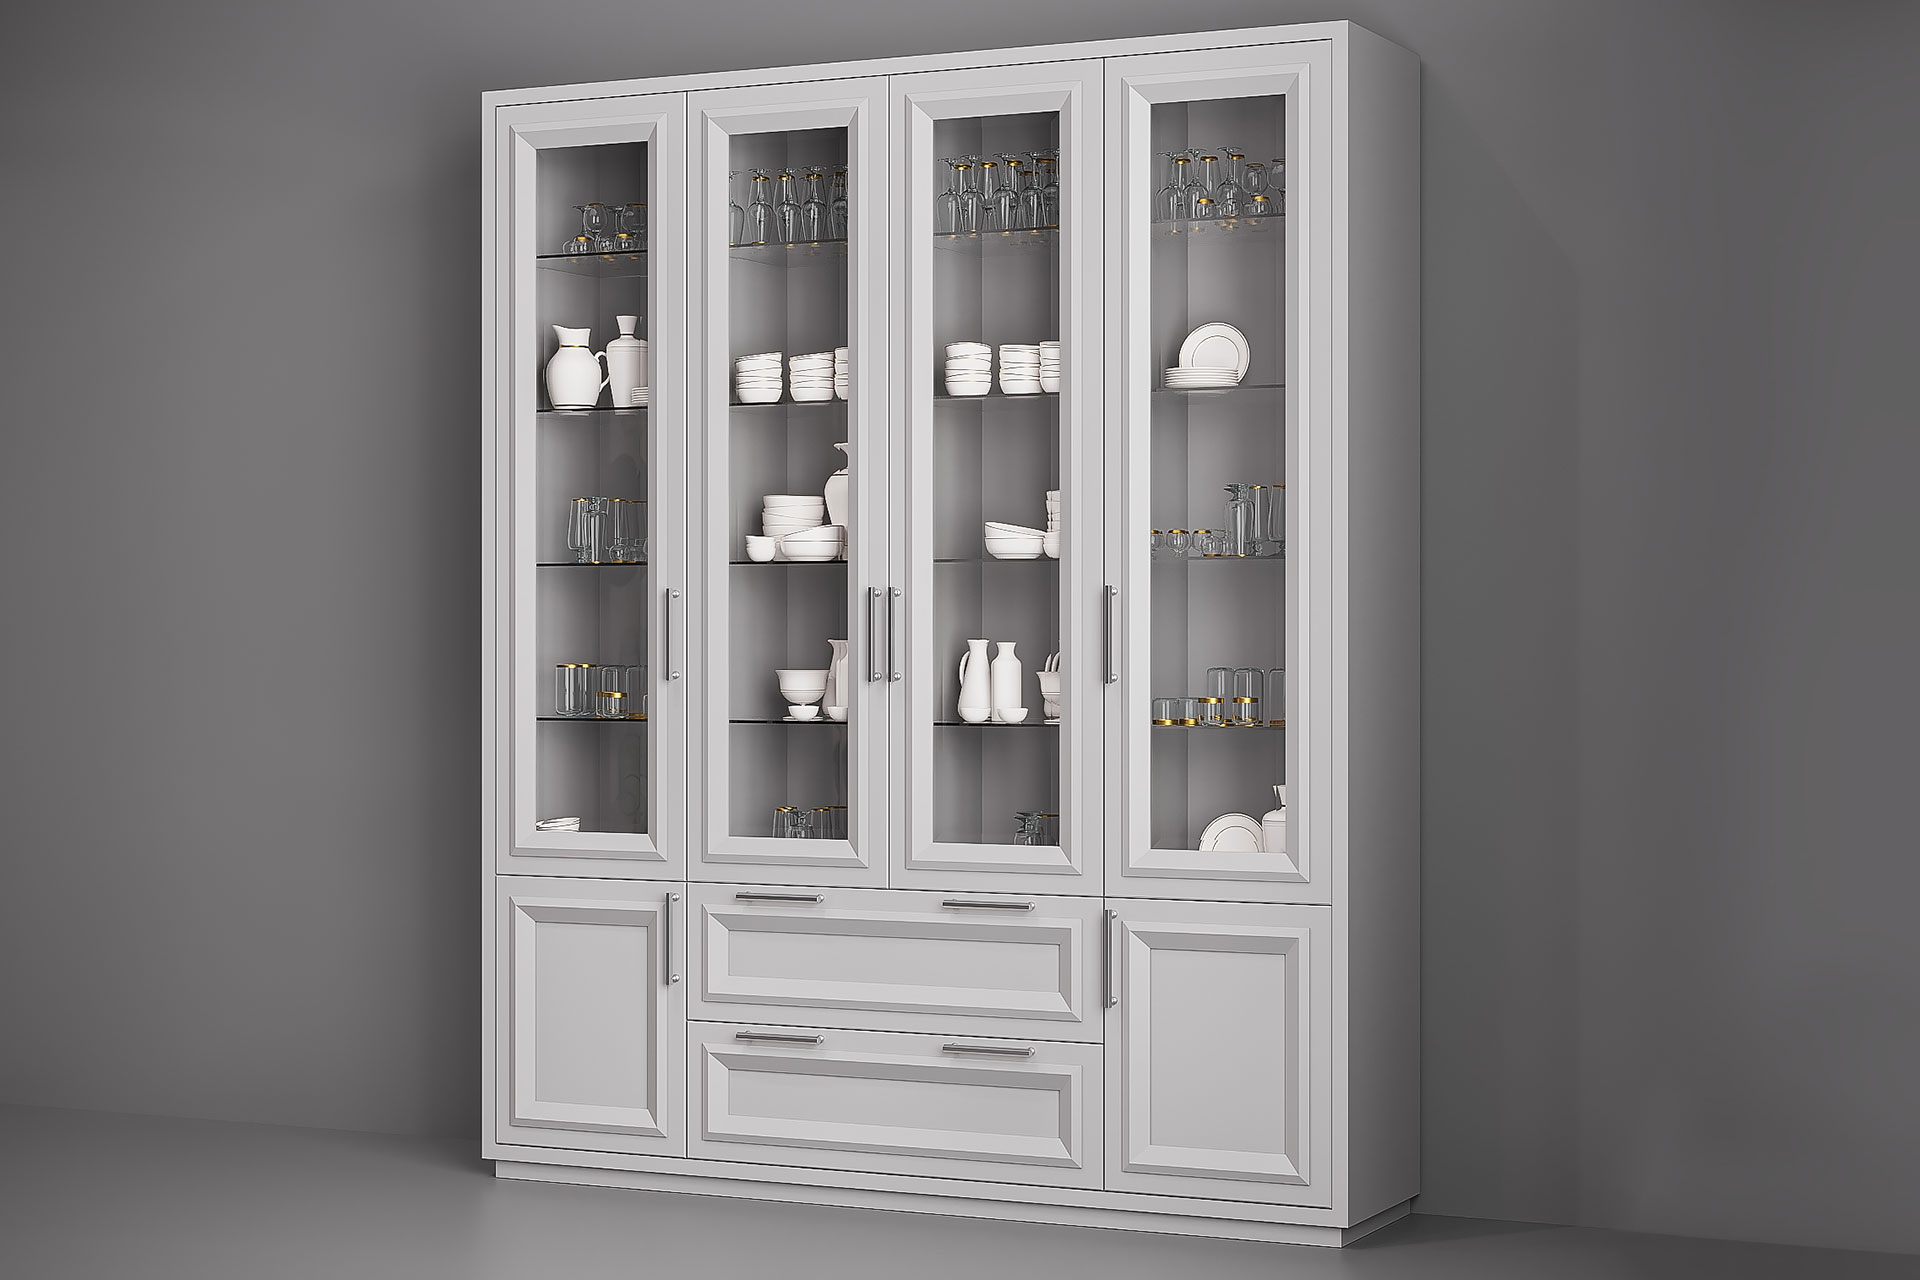 Display cabinet for the kitchen with glass fronts and wooden frames on the fronts